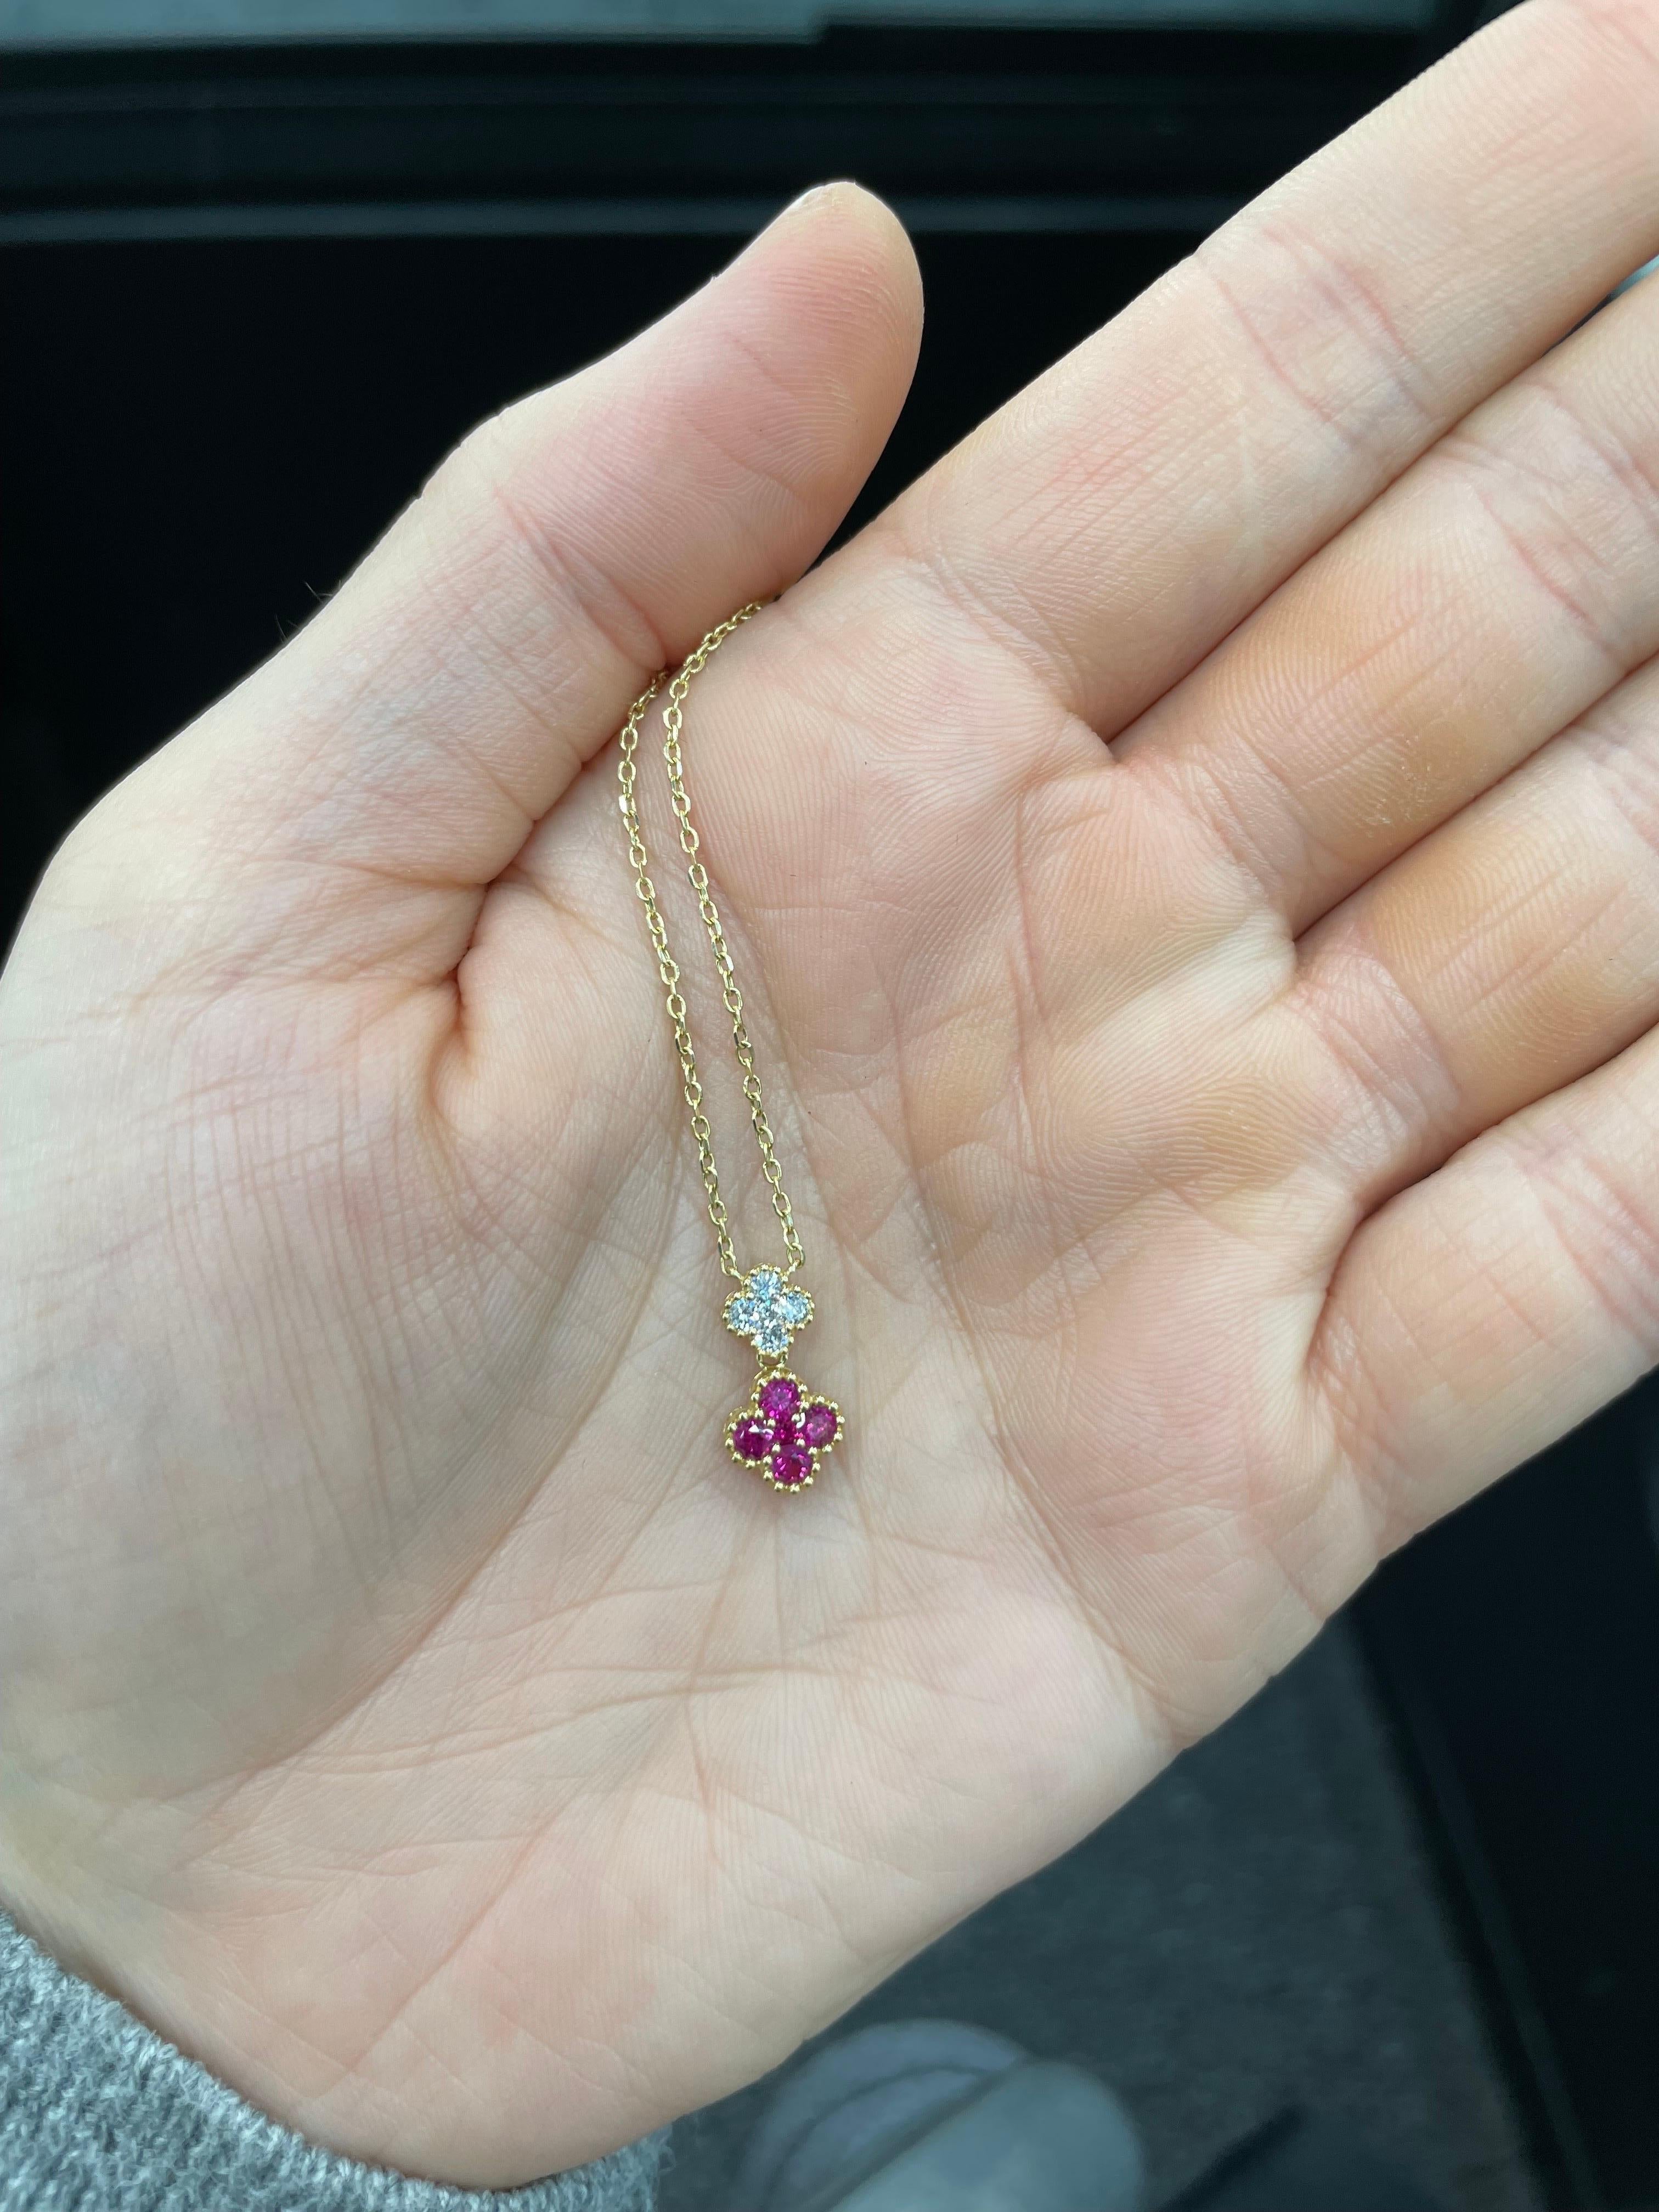 Double Cluster Ruby Diamond Pendant Necklace 0.47 Carats 18 Karat Yellow Gold For Sale 2